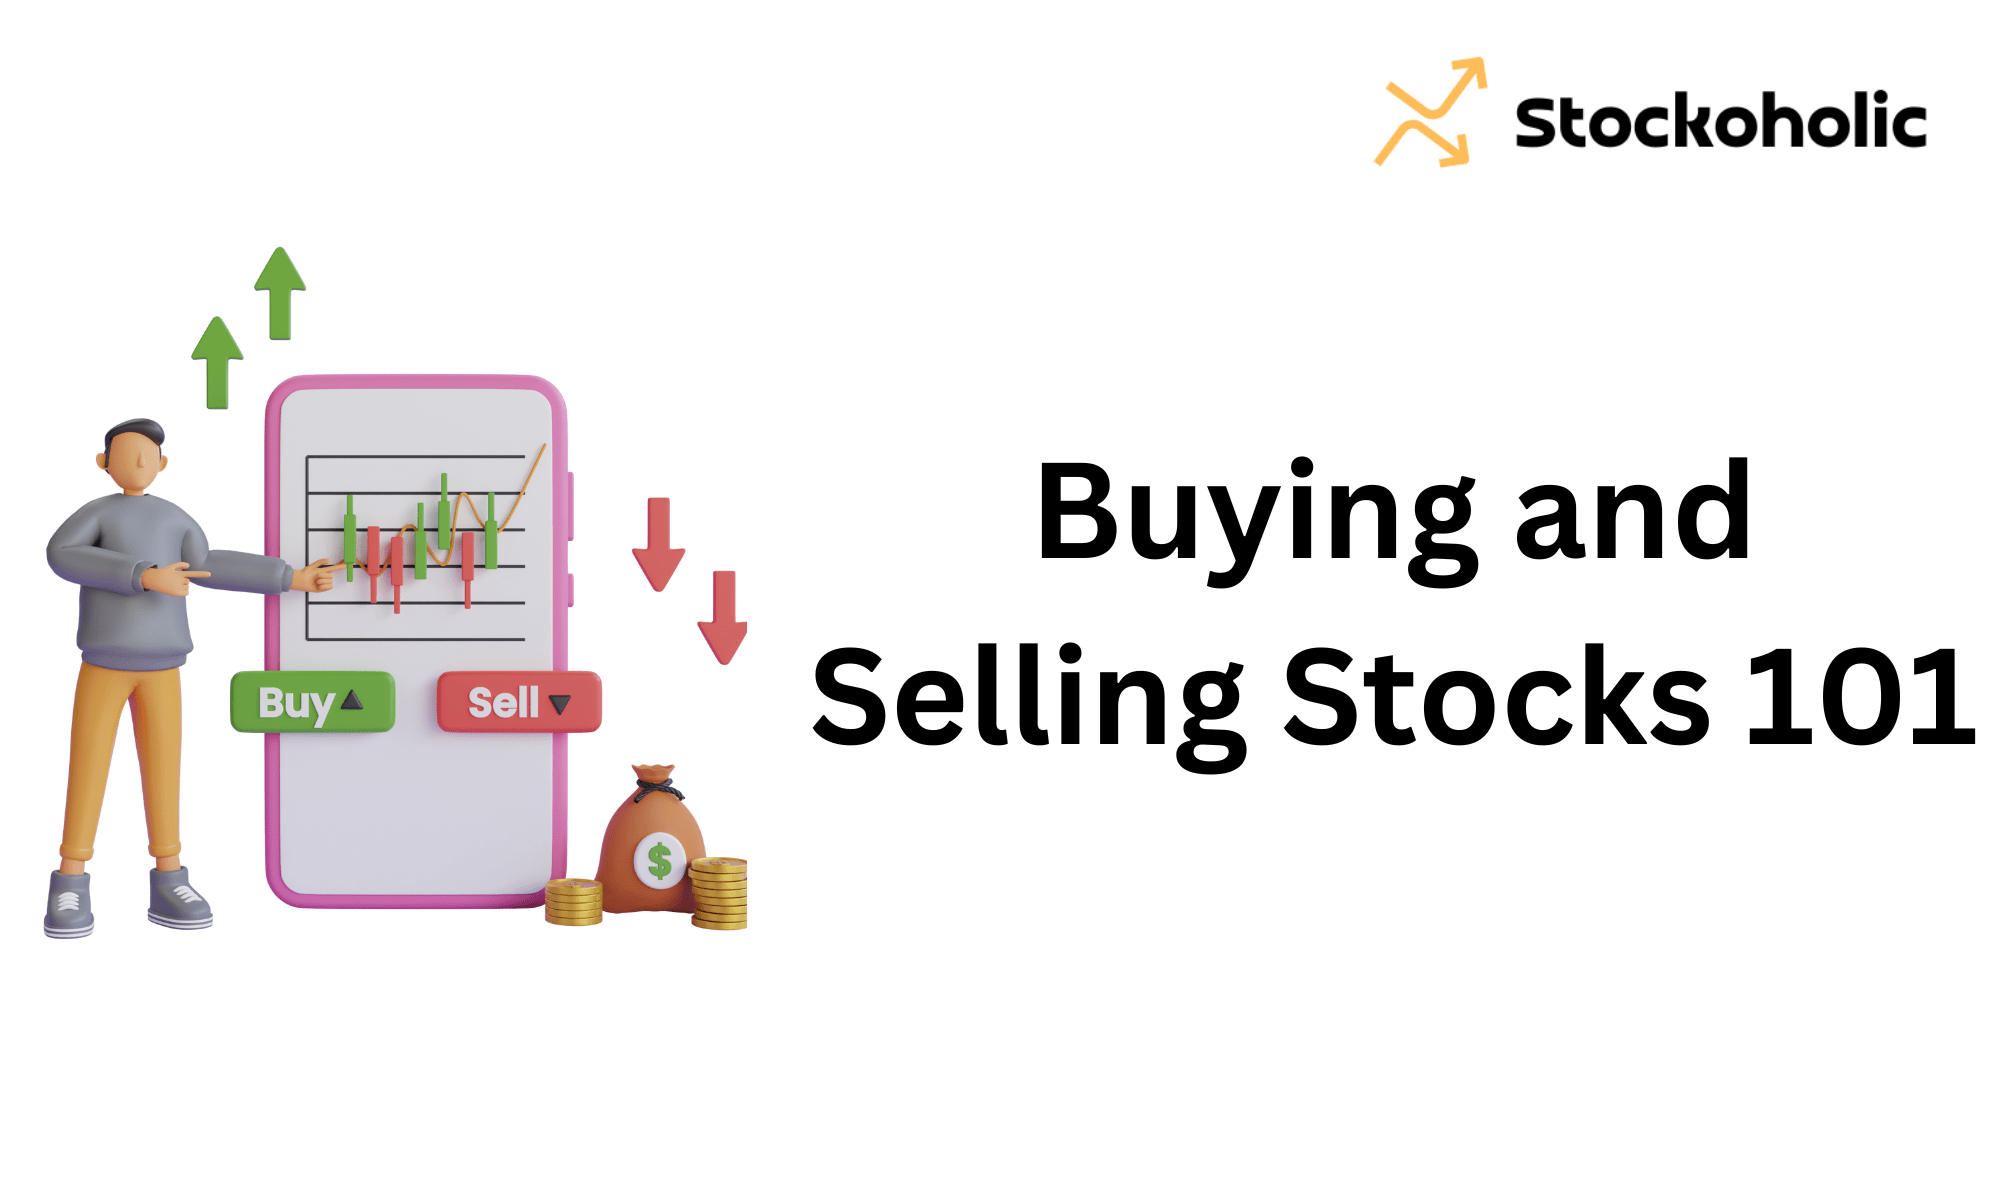 buying and selling stocks